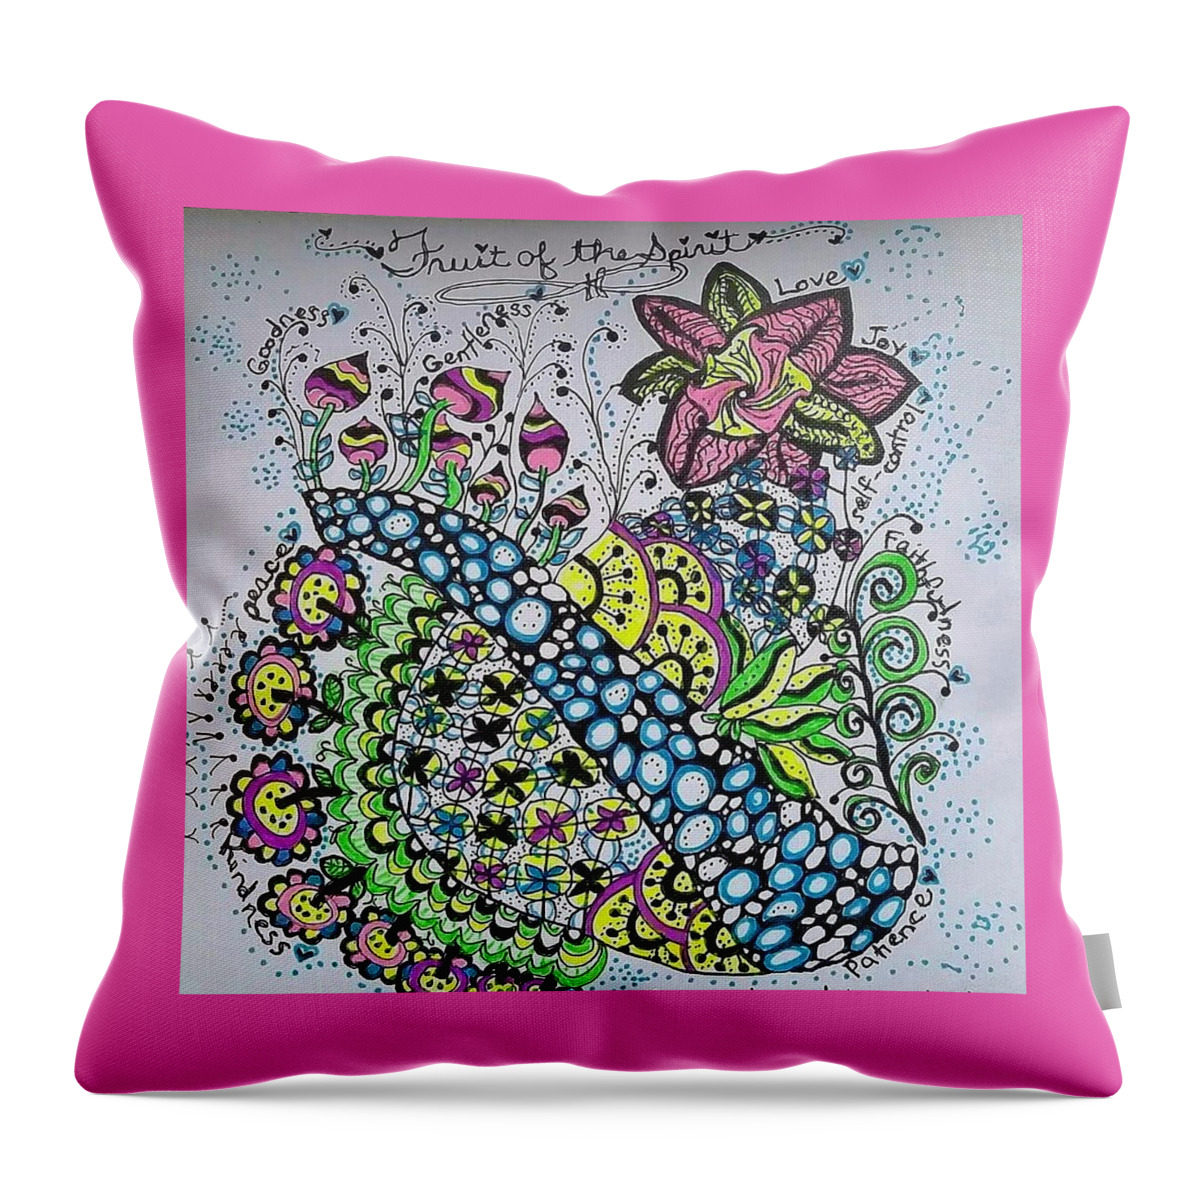 Caregiver Throw Pillow featuring the drawing Fruit of the Spirit by Carole Brecht